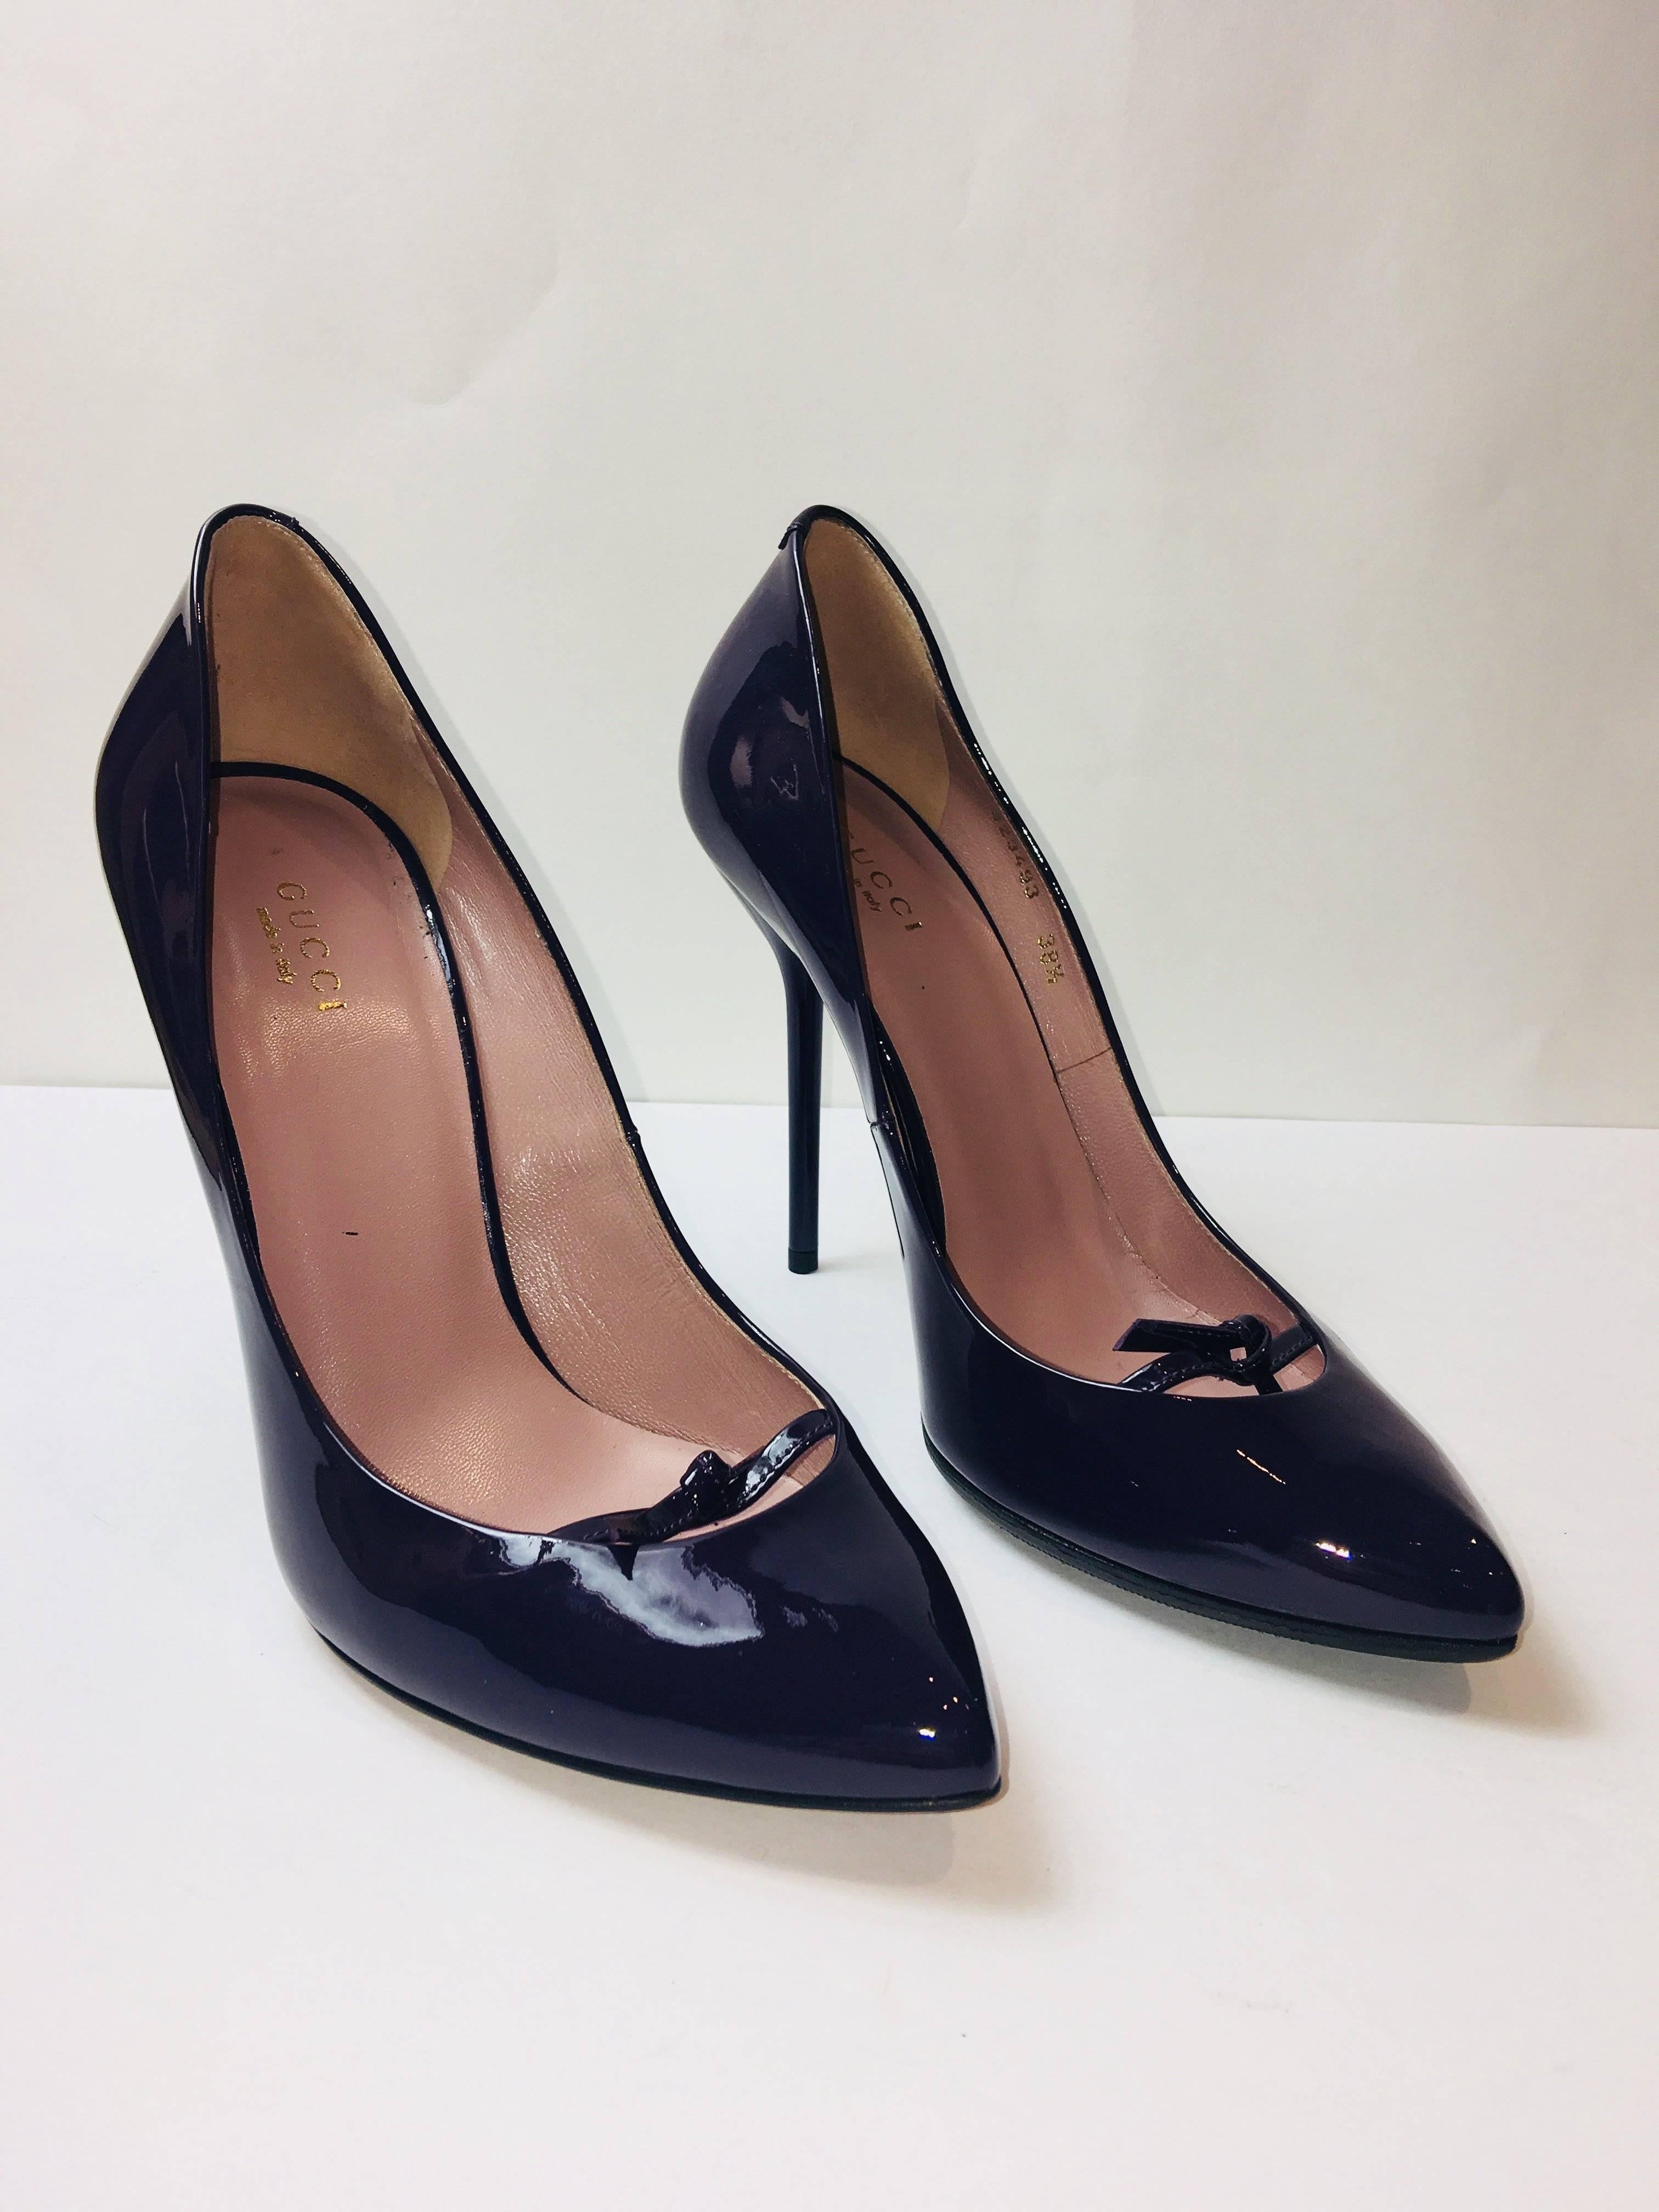 Gucci Pointed Toe Purple Patent Leather Pump with Small Bow at Toe